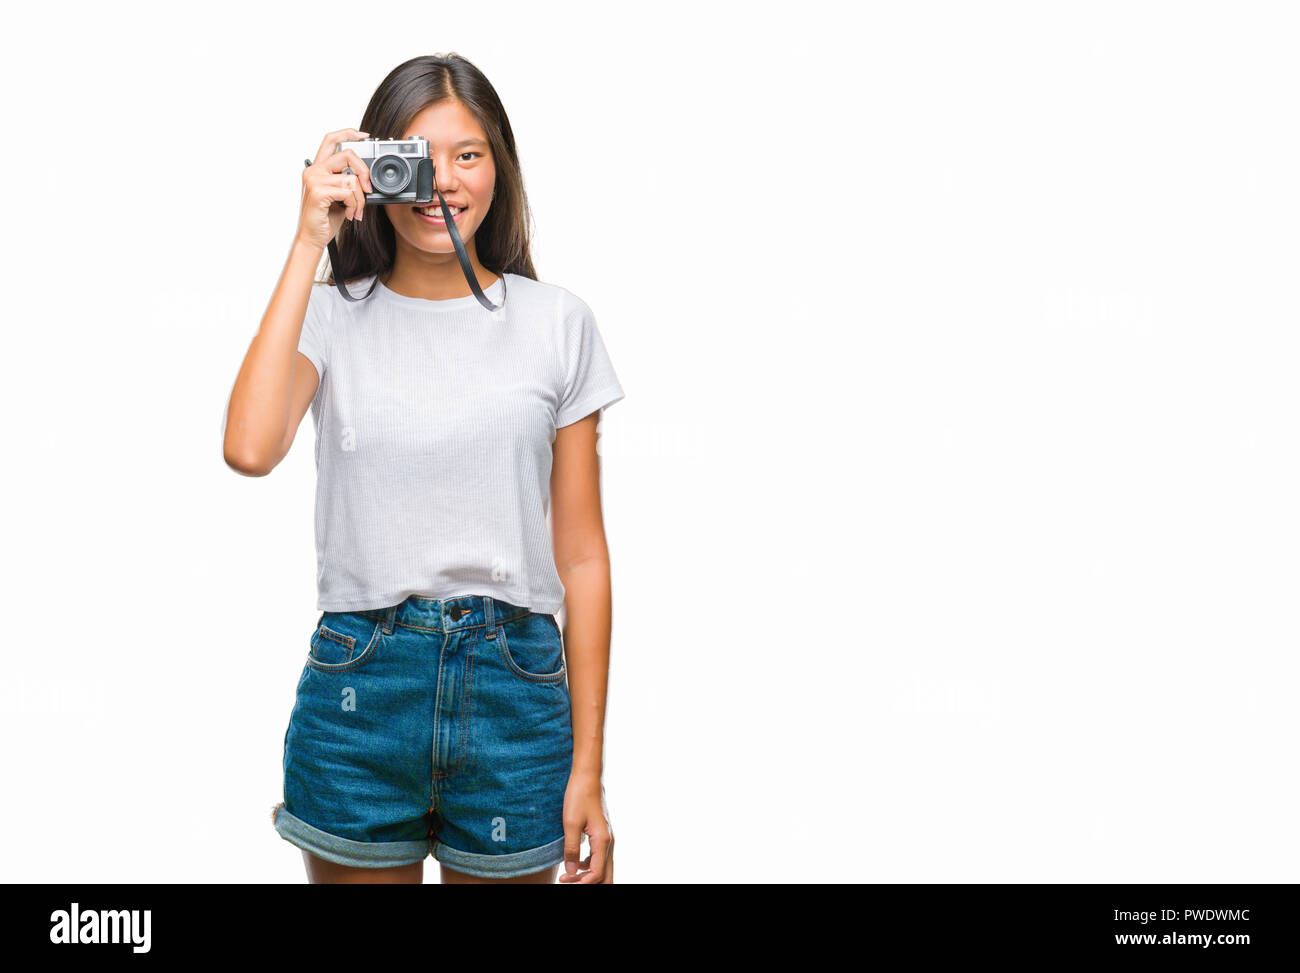 Young asian woman holding vintagera photo camera over isolated background with a happy face standing and smiling with a confident smile showing teeth Stock Photo